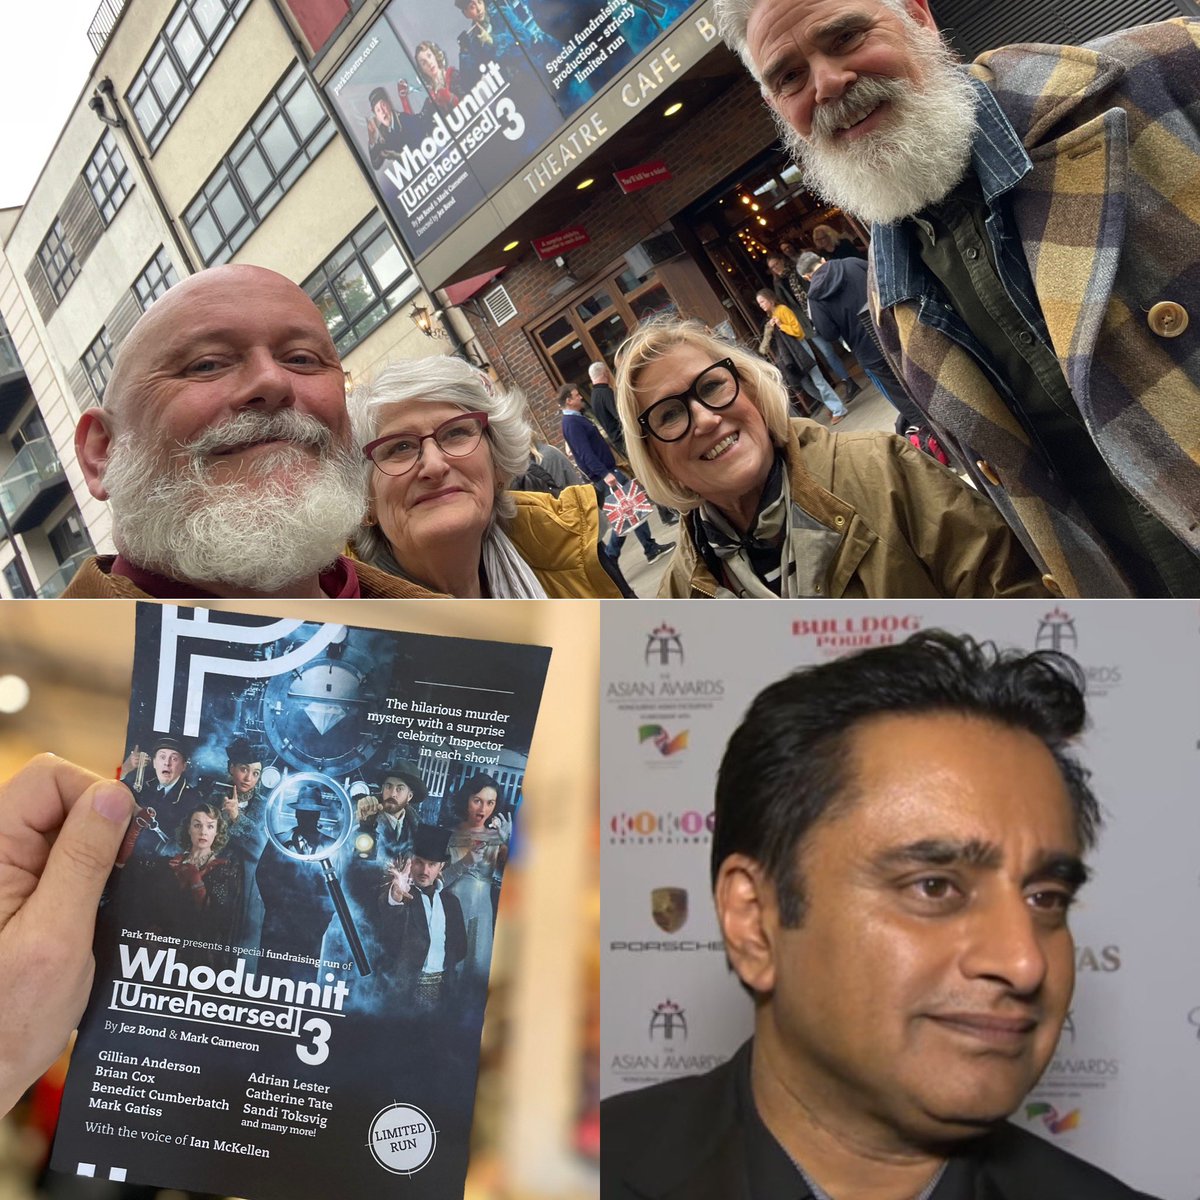 Wonderful afternoon at the @ParkTheatre with @TVSanjeev to celebrate hubby’s birthday, a great show